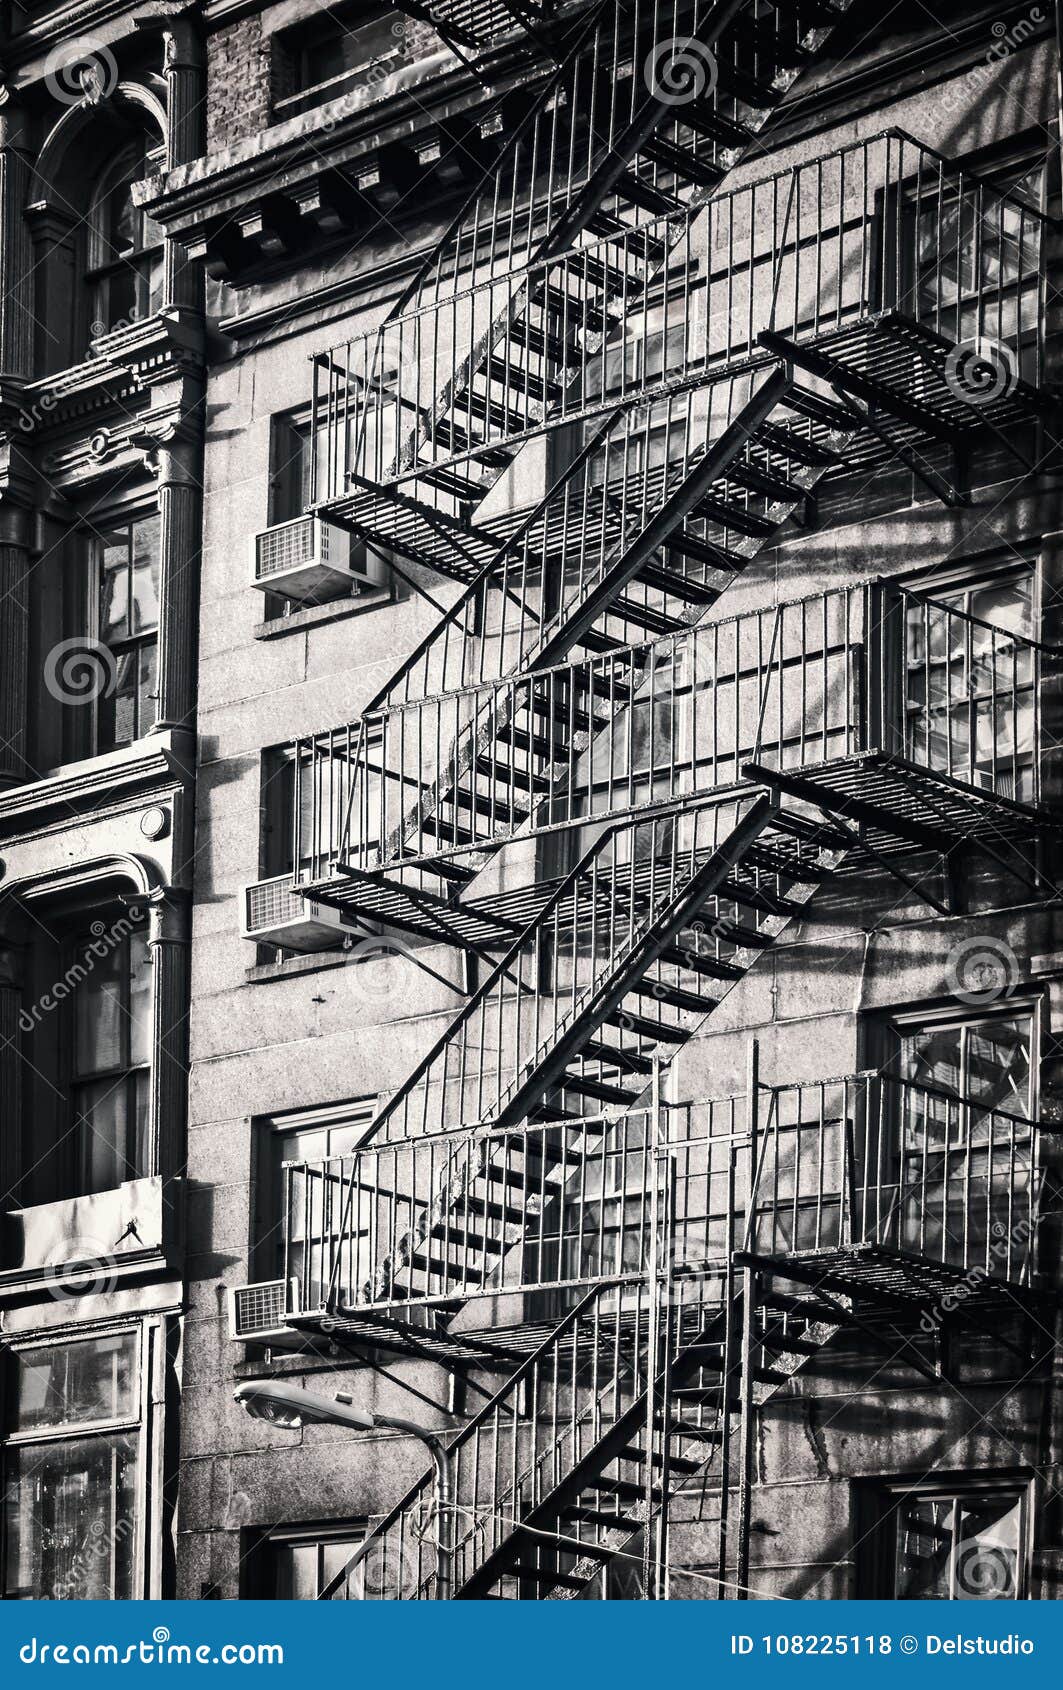 outside metal fire escape stairs, new york city black and white